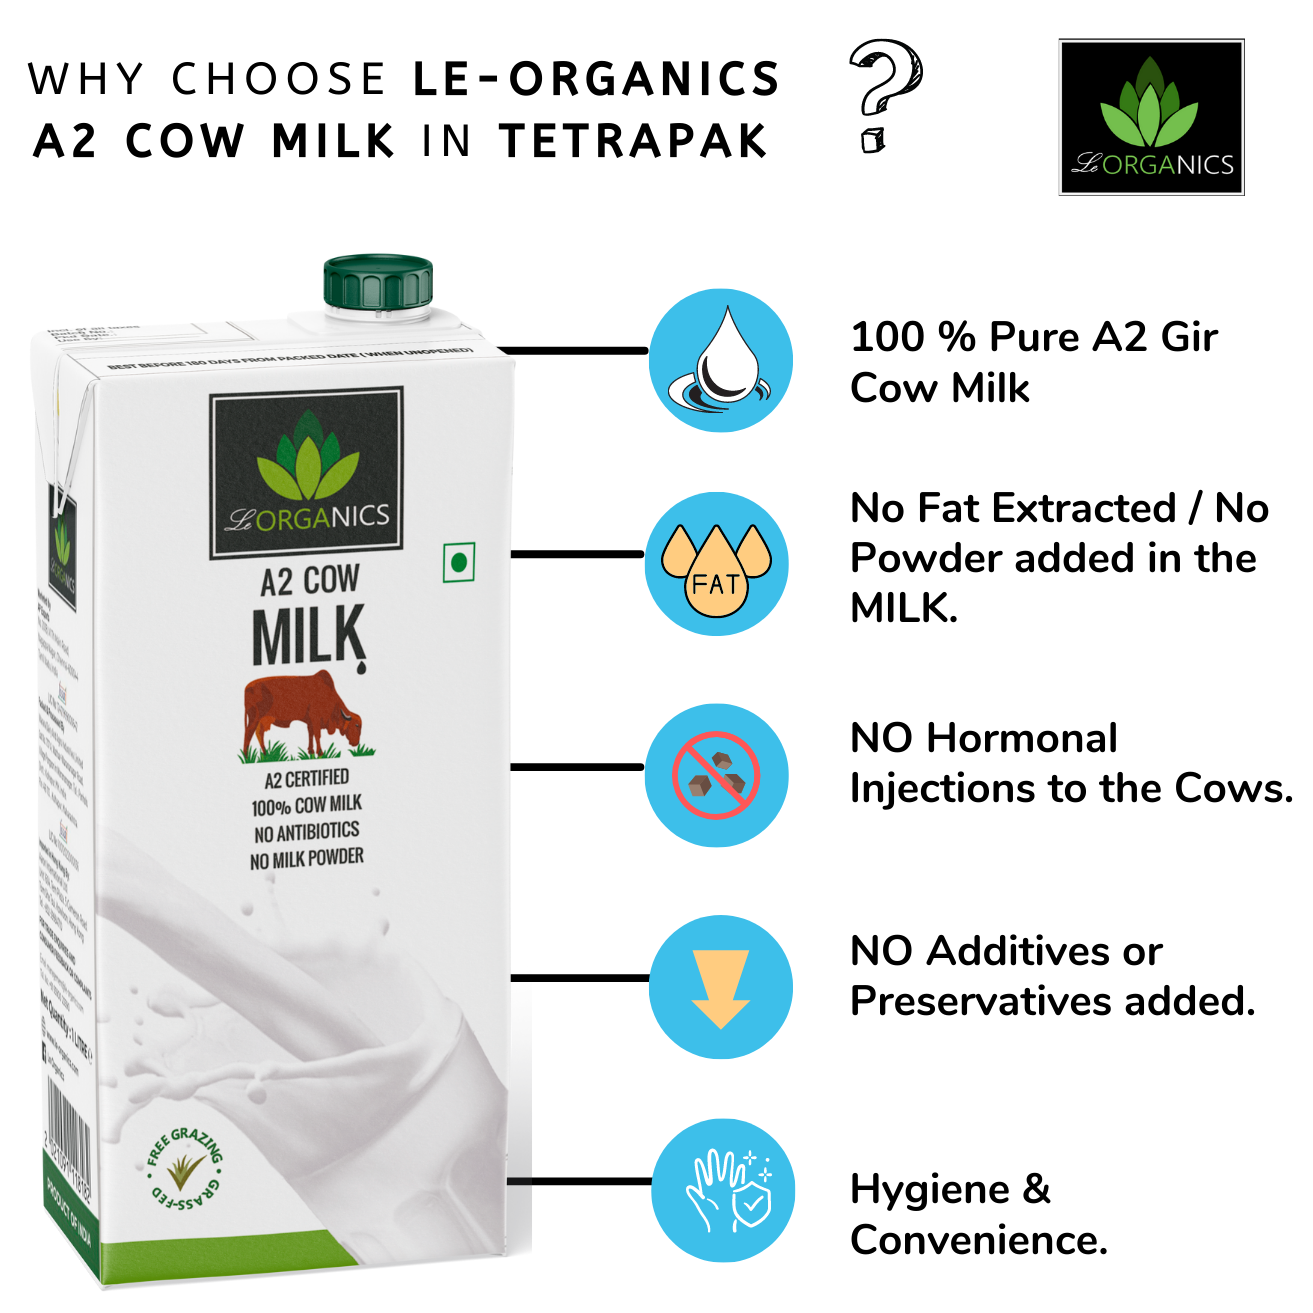 Le-Organics A2 Cow milk in Tetrapak | Pure Gir Cow Milk | UHT Treated | NO Antibiotics | Certified A2 | Pack of 12 - 1 ltr each